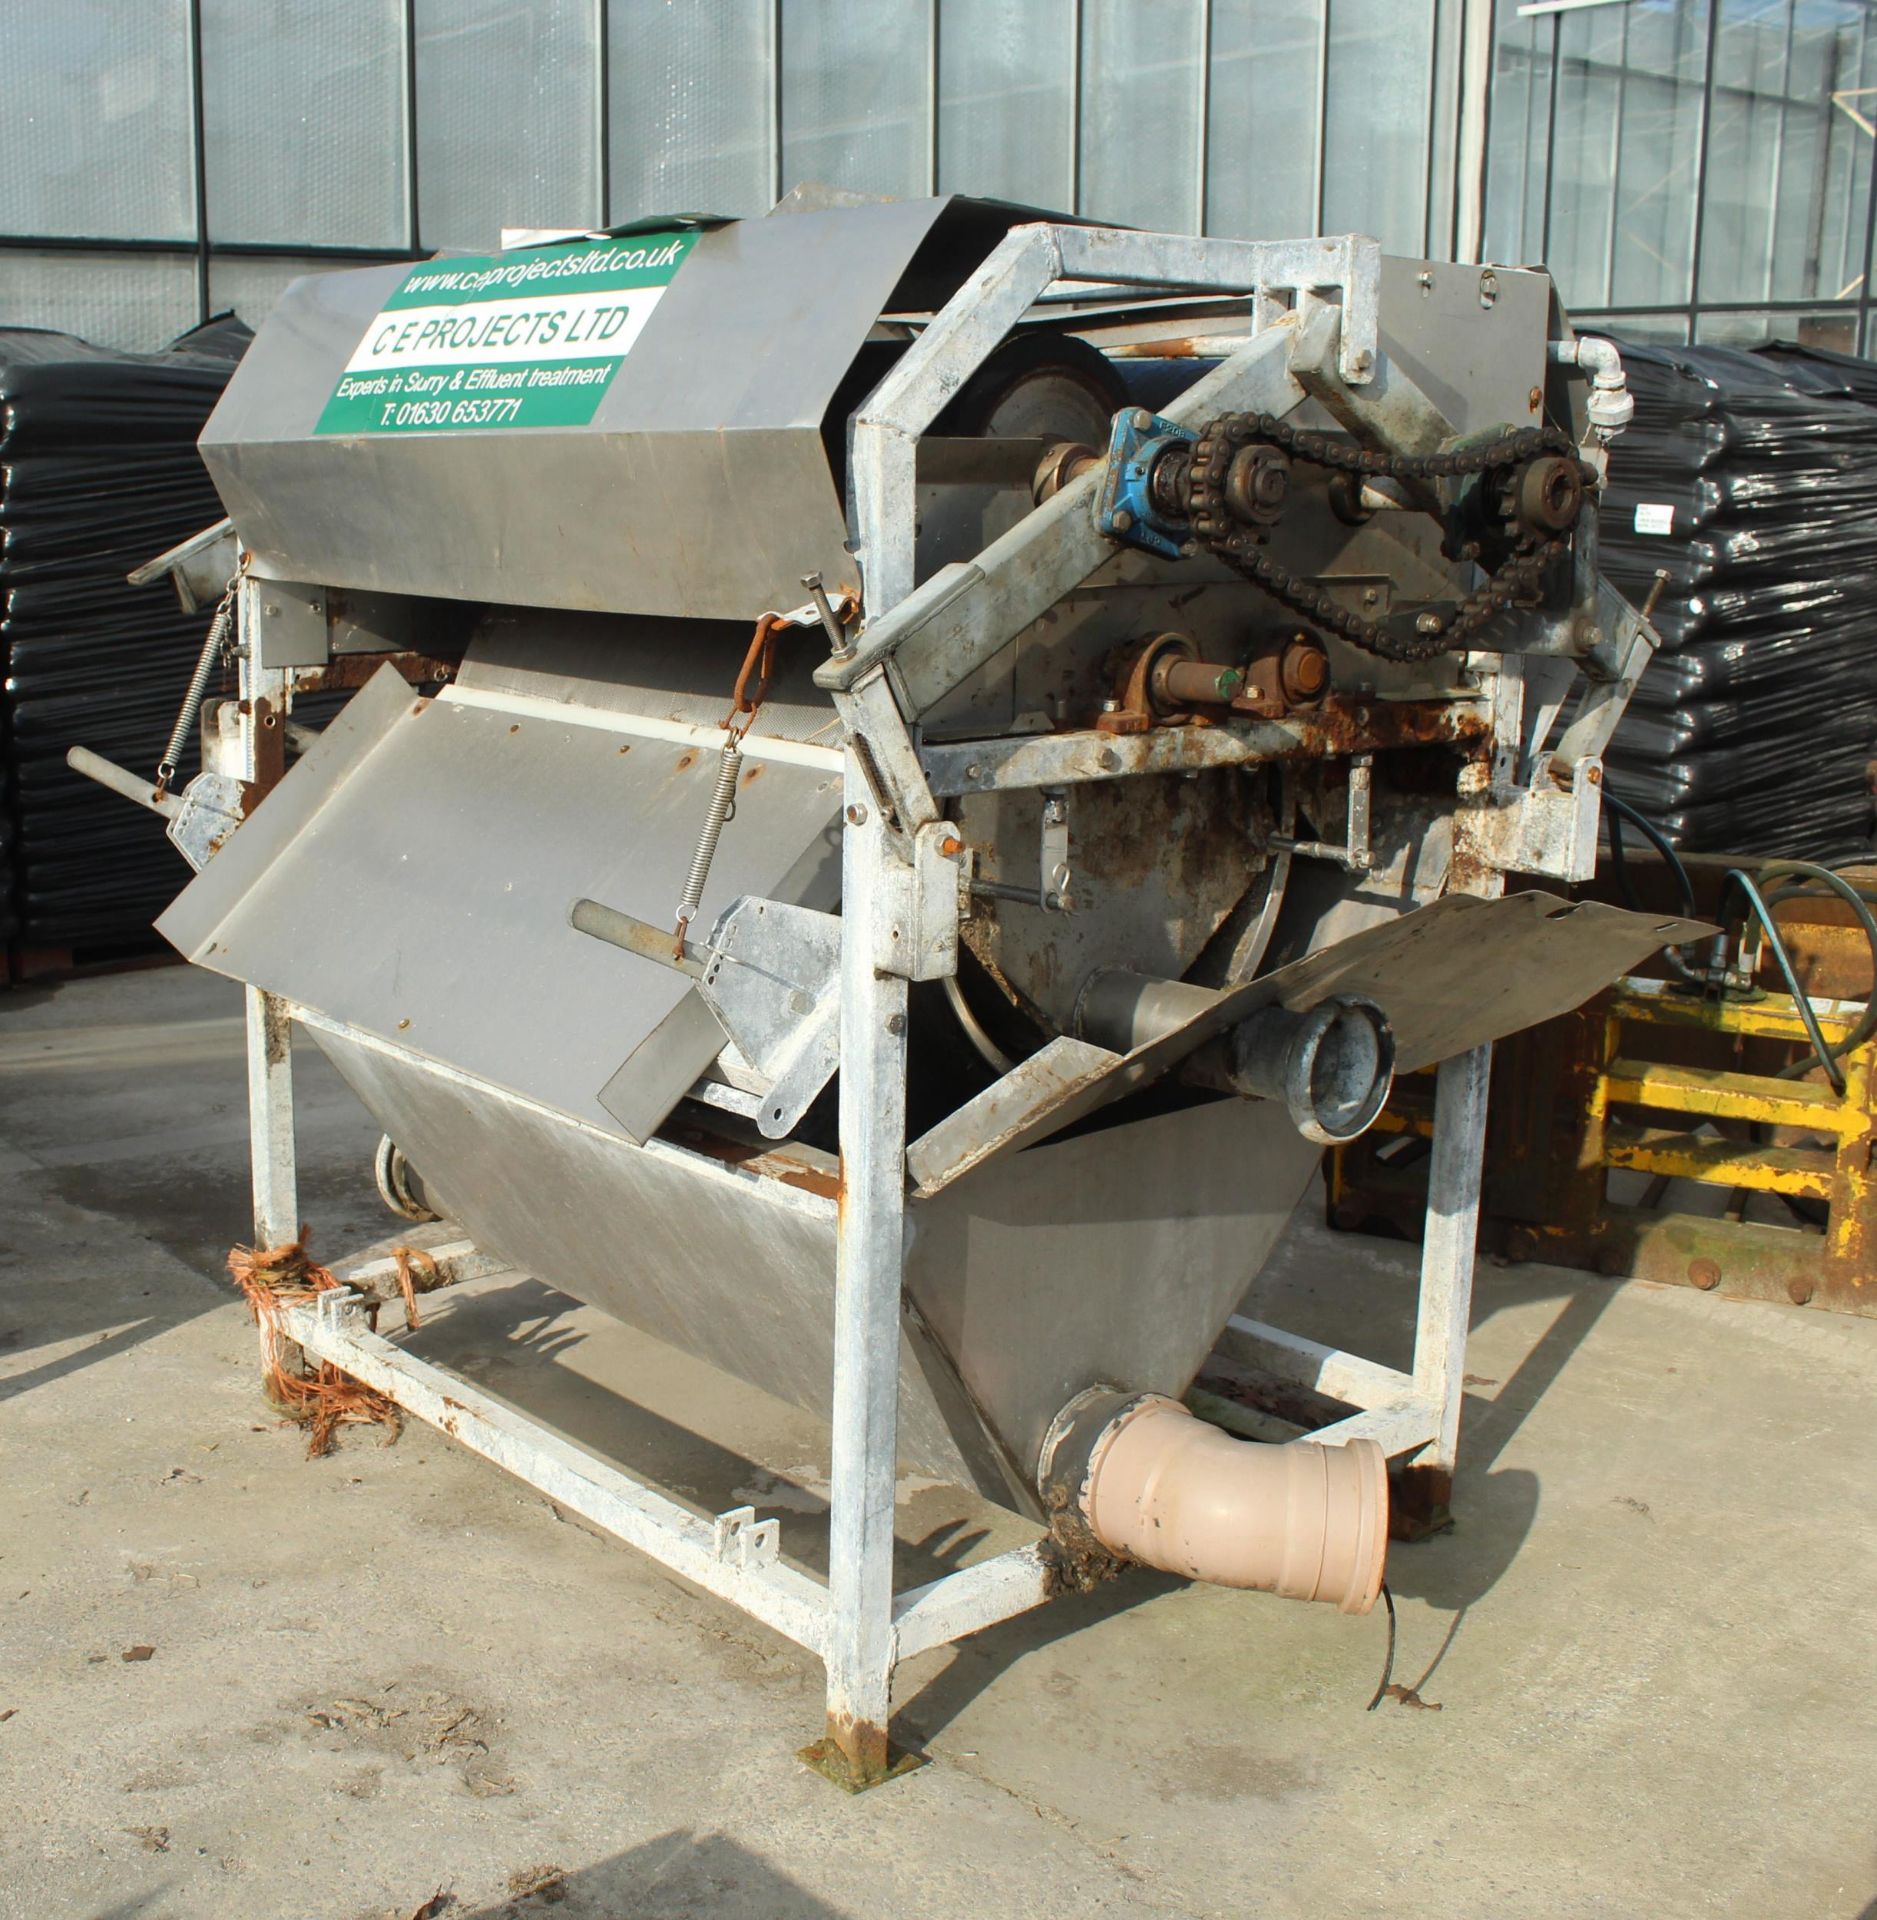 AN EVO2000 SLURRY SEPERATOR BASED ON THE CARRIER SEPERATORS SOLD BY CE PROJECTS AND A FURTHER SLURRY - Image 3 of 8